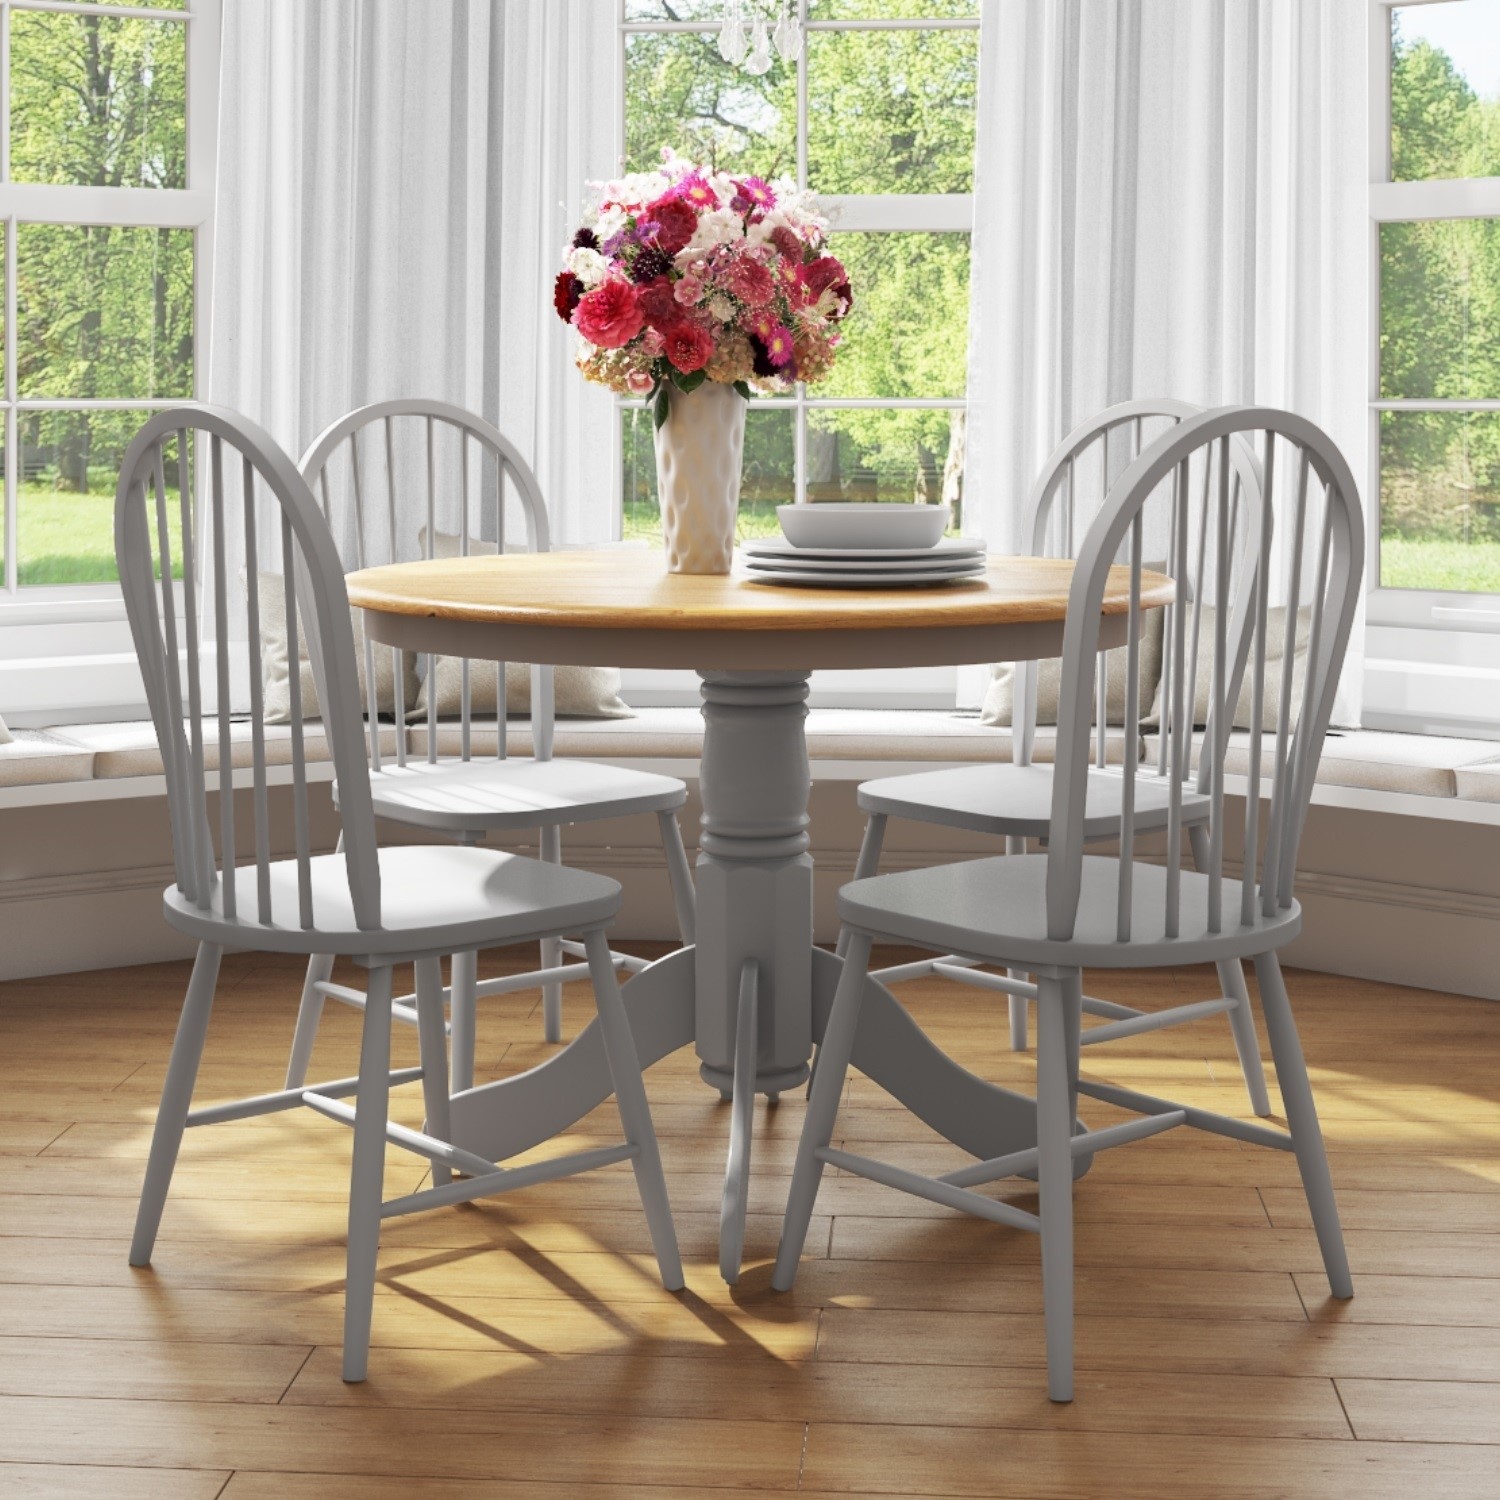 Round Dining Table With 4 Chairs In Grey With Oak Finish Rhode Island Buyitdirect Ie